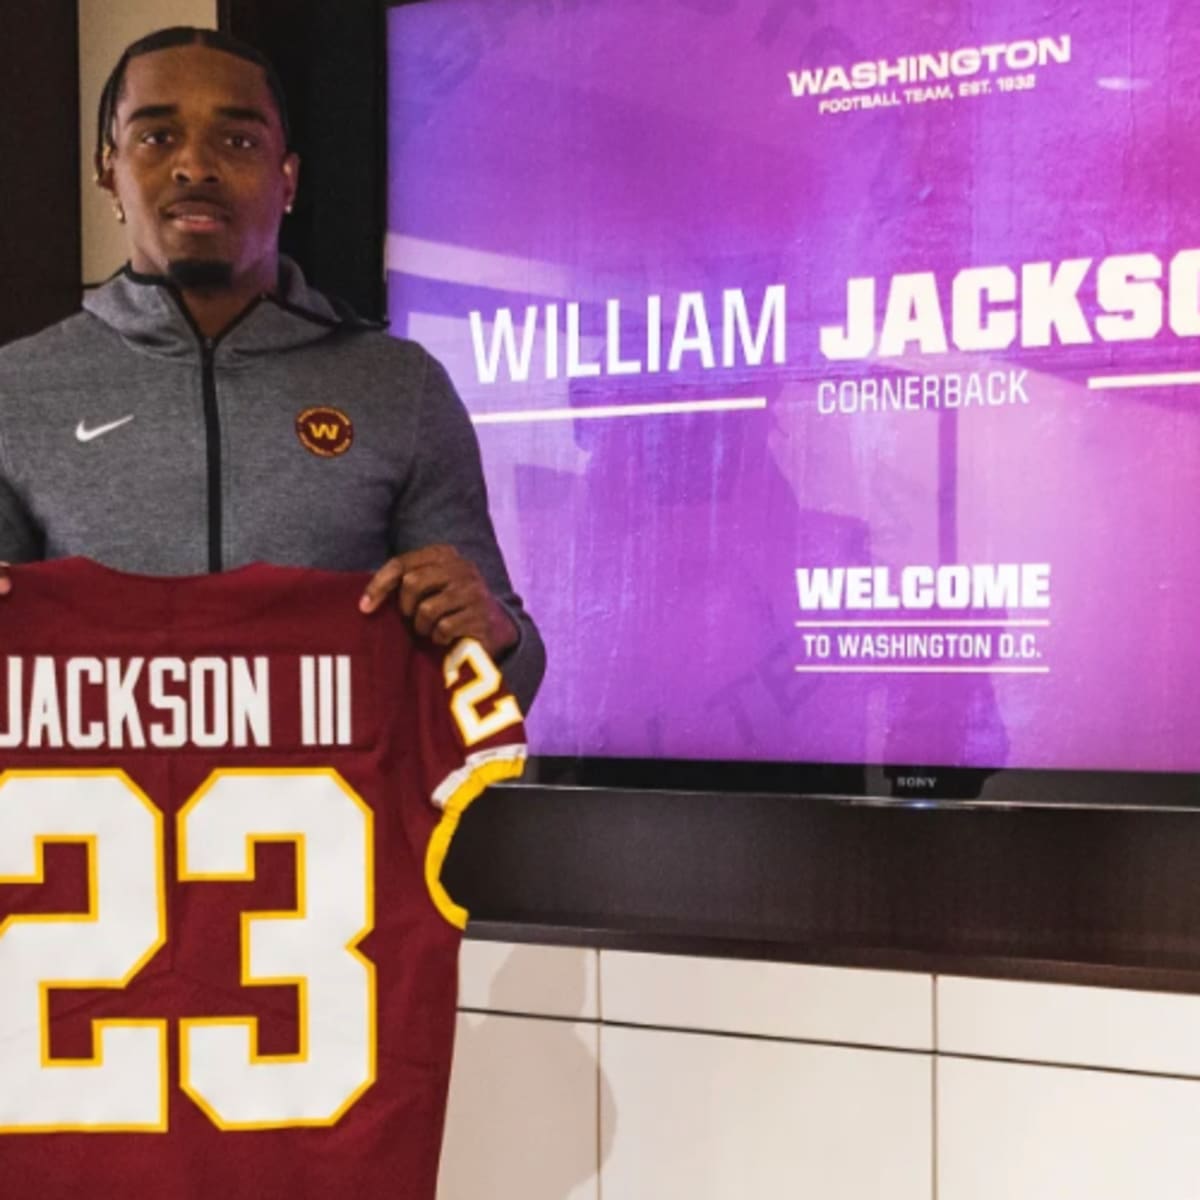 William Jackson III Gets New Number, Now Needs To Get Something